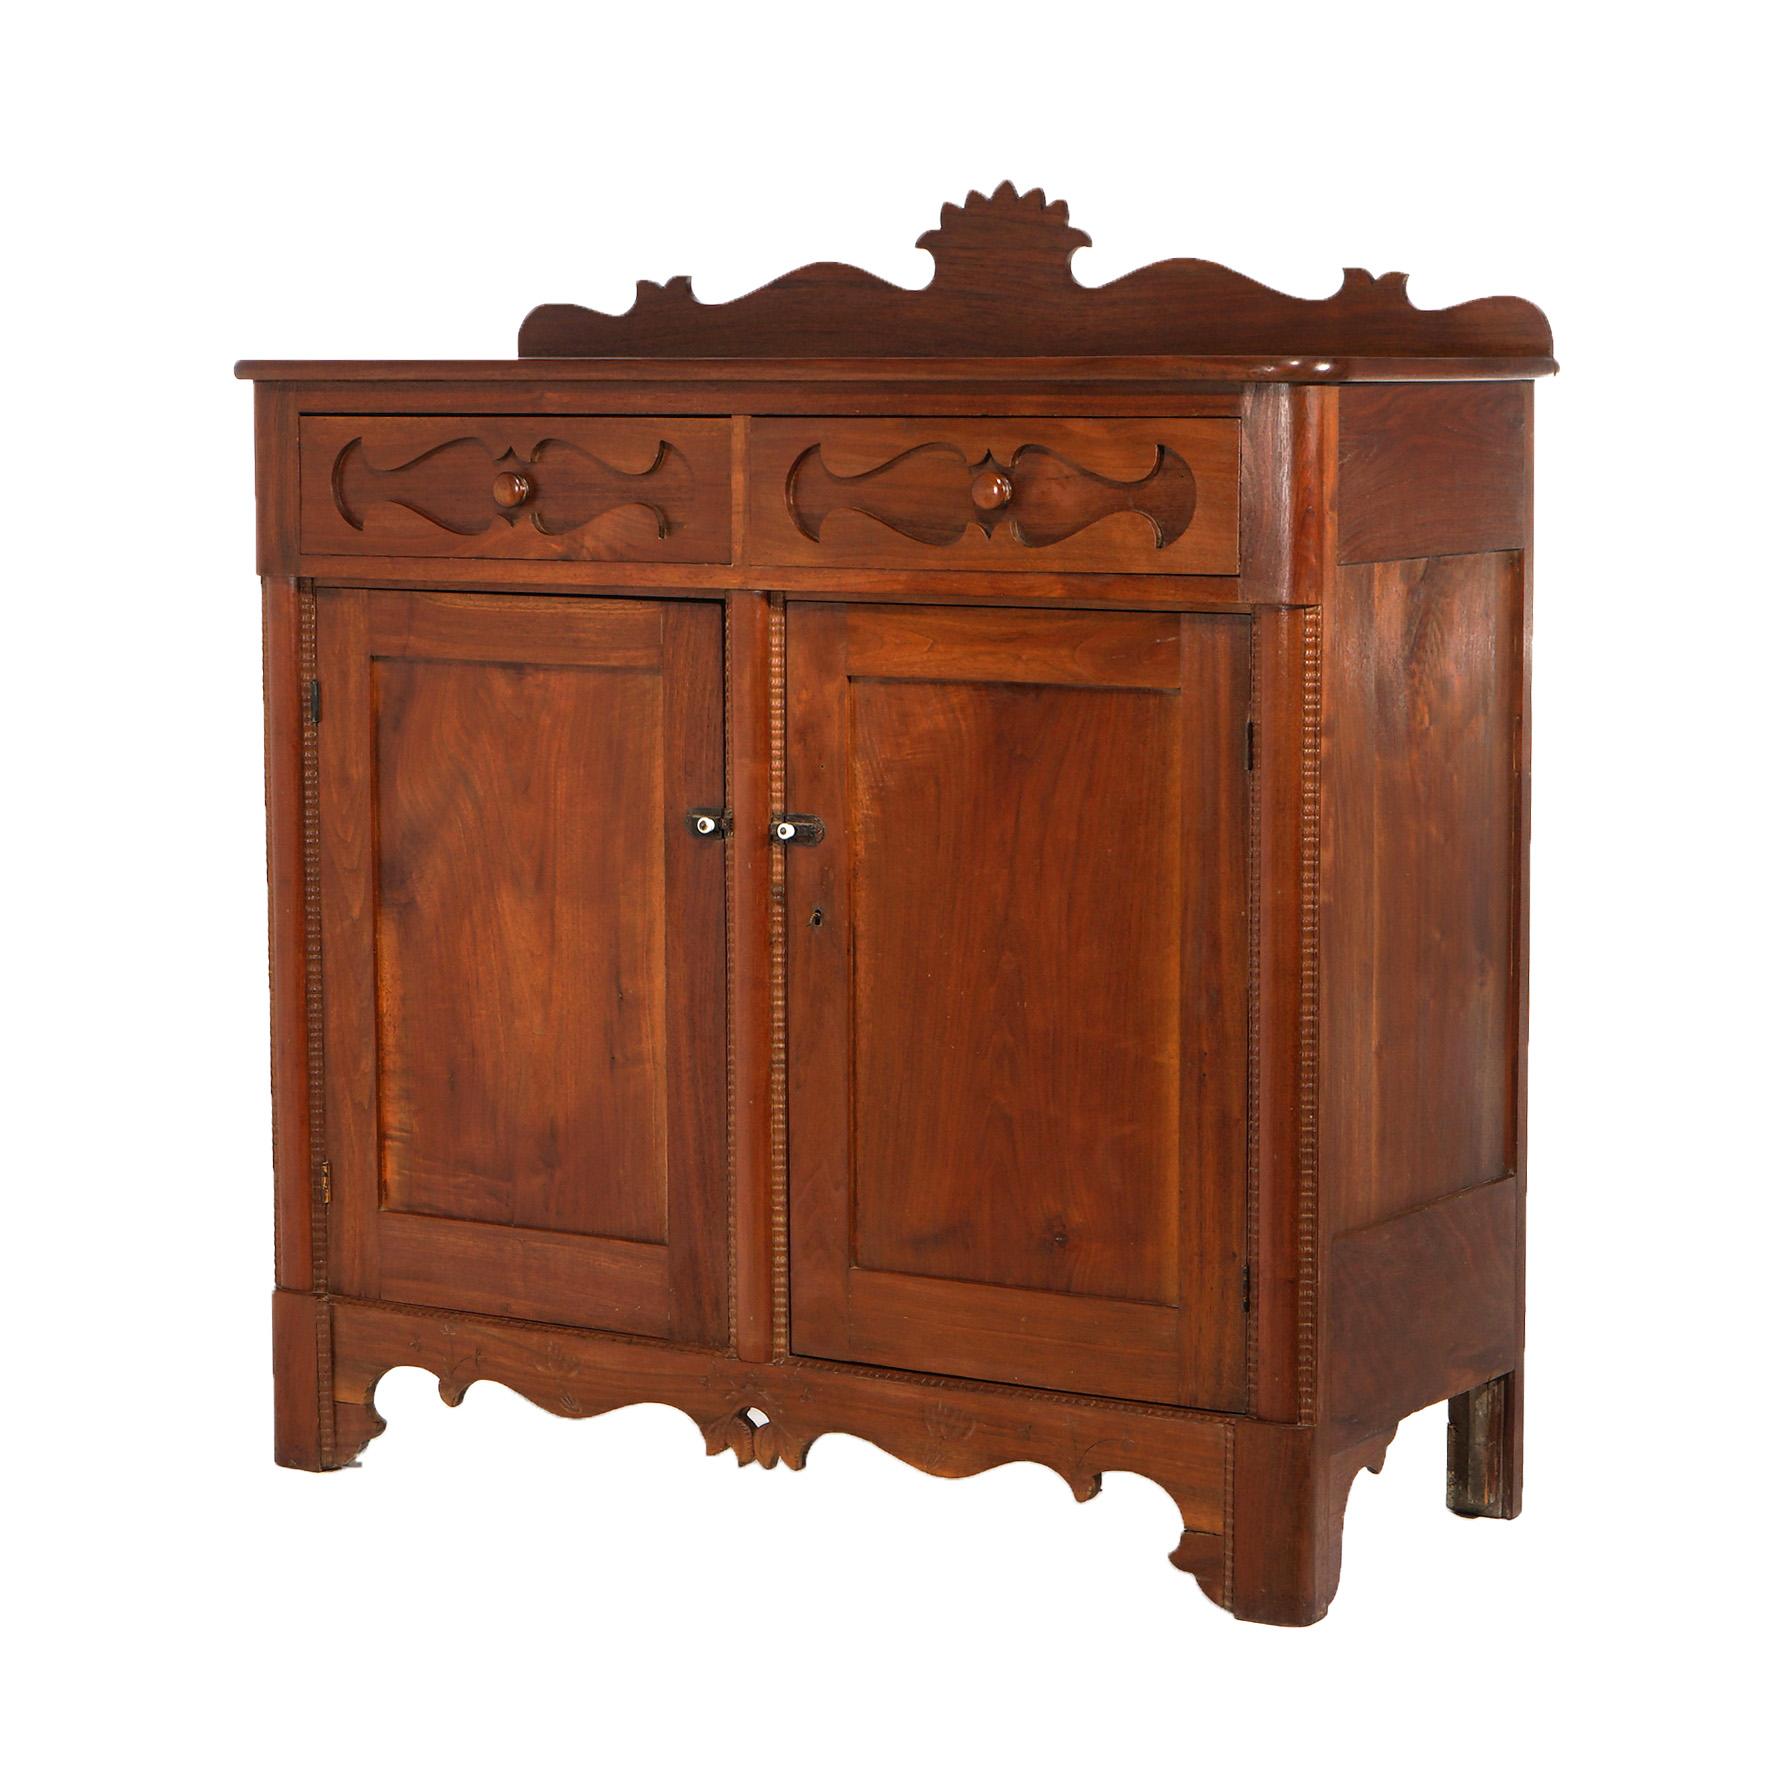 ***Ask About Reduced In-House Shipping Rates - Reliable Service & Fully Insured***
An antique country store sideboard or jelly cupboard offers walnut construction with shaped backsplash over double drawers with shaped panels over double door cabinet